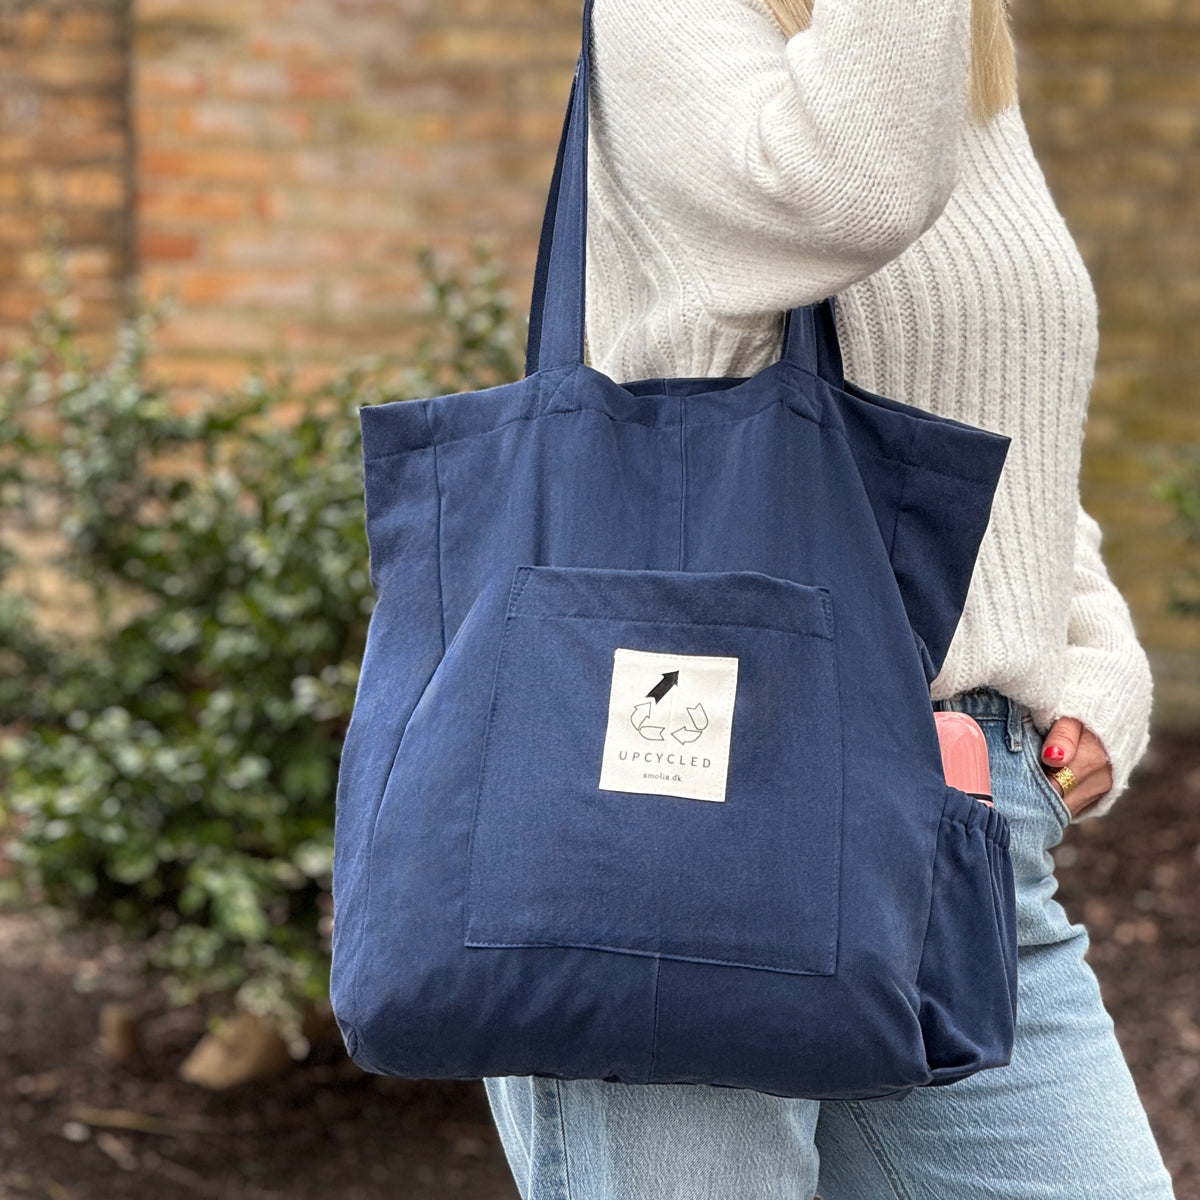 Upcycled tote bag with bottle holder, navy blue